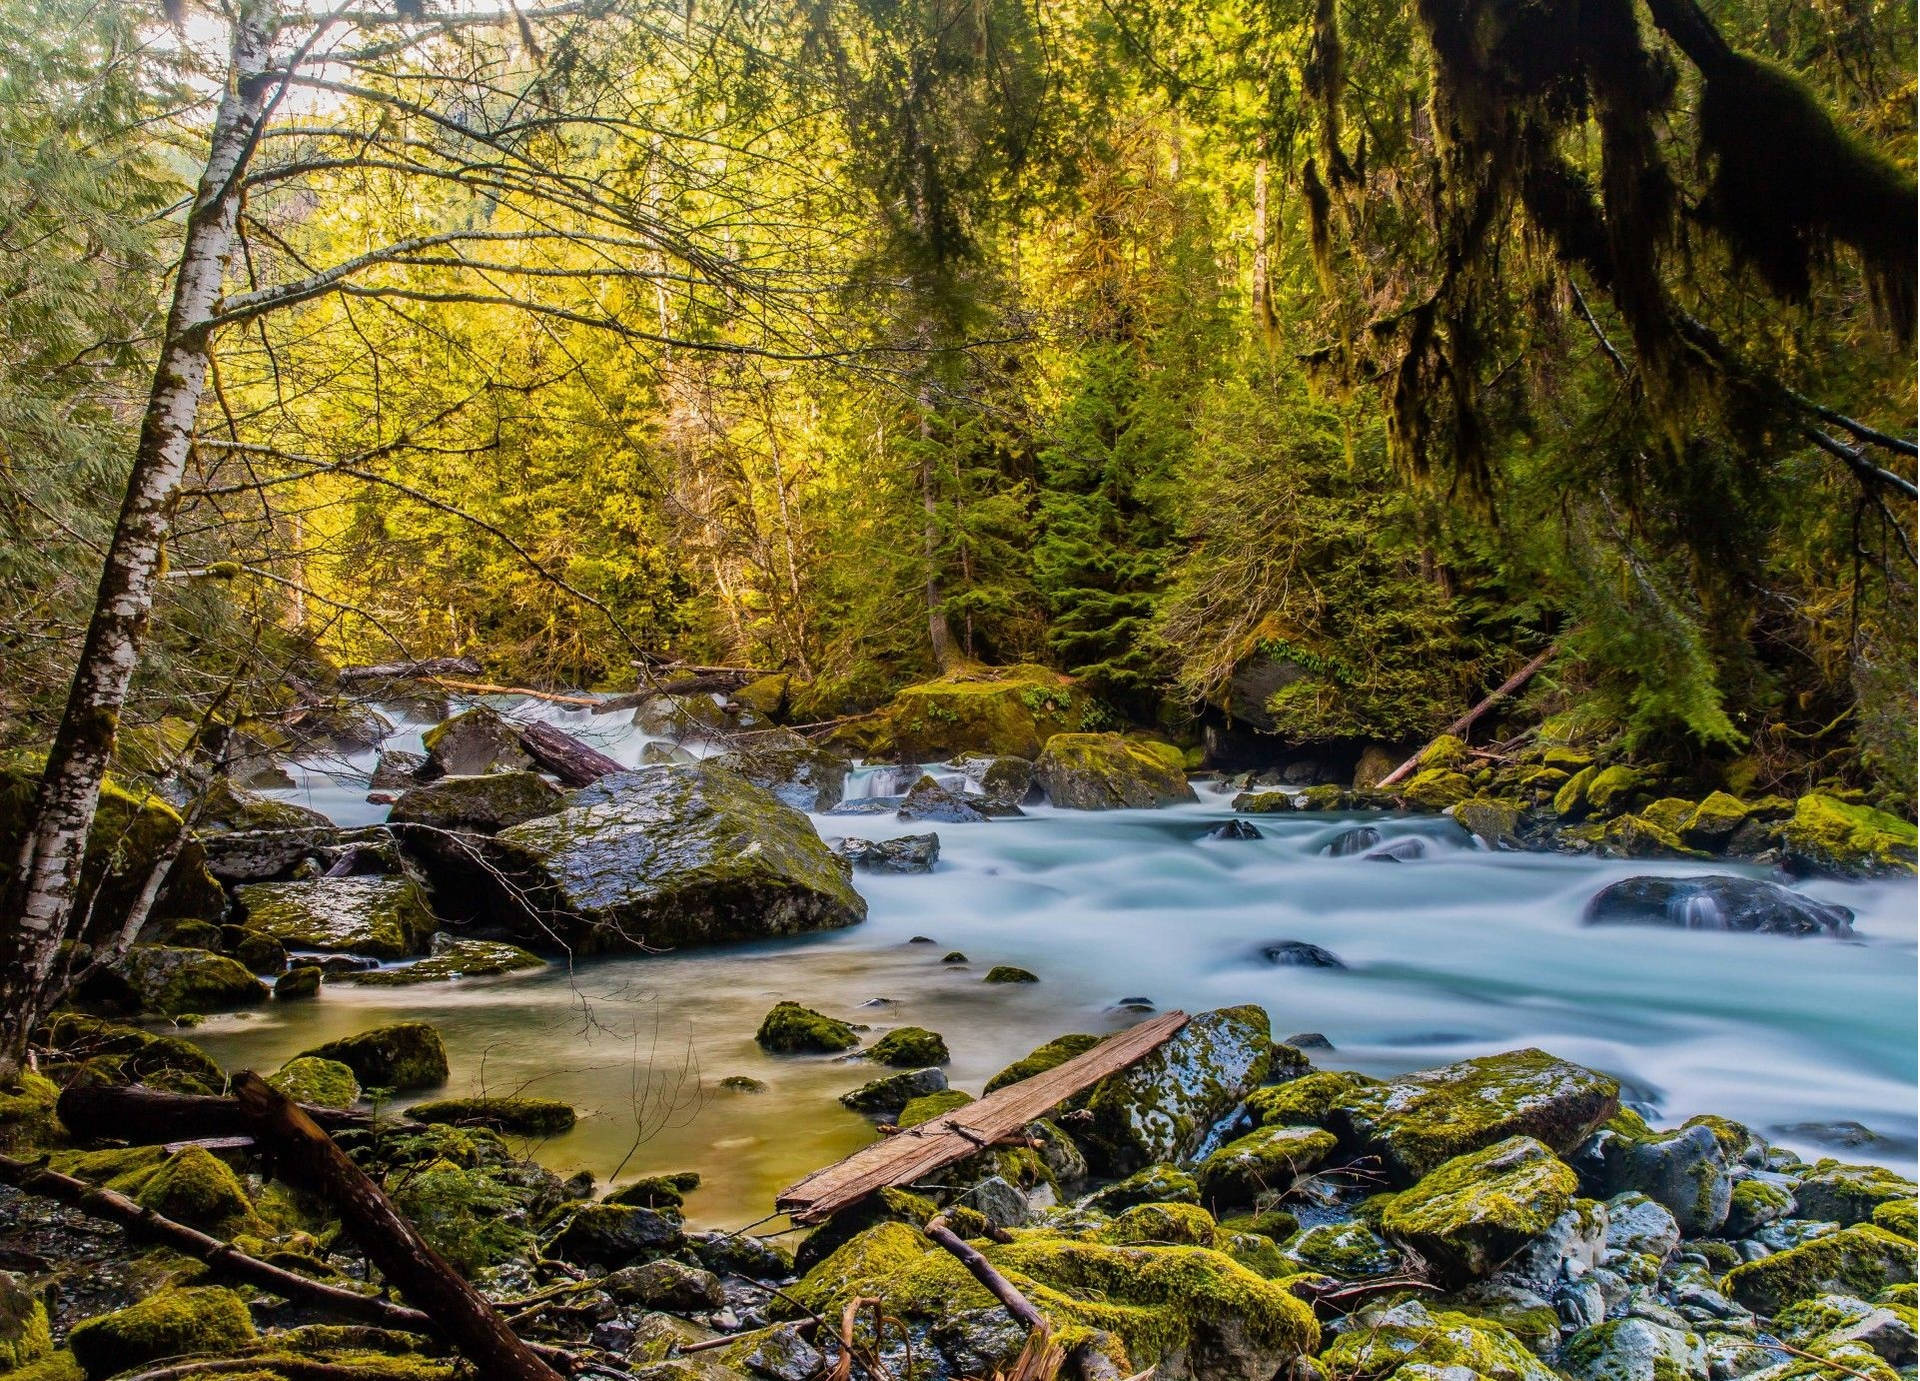 Majestic Rocky River Cutting Through The Lush Green Forest In Forks, Washington